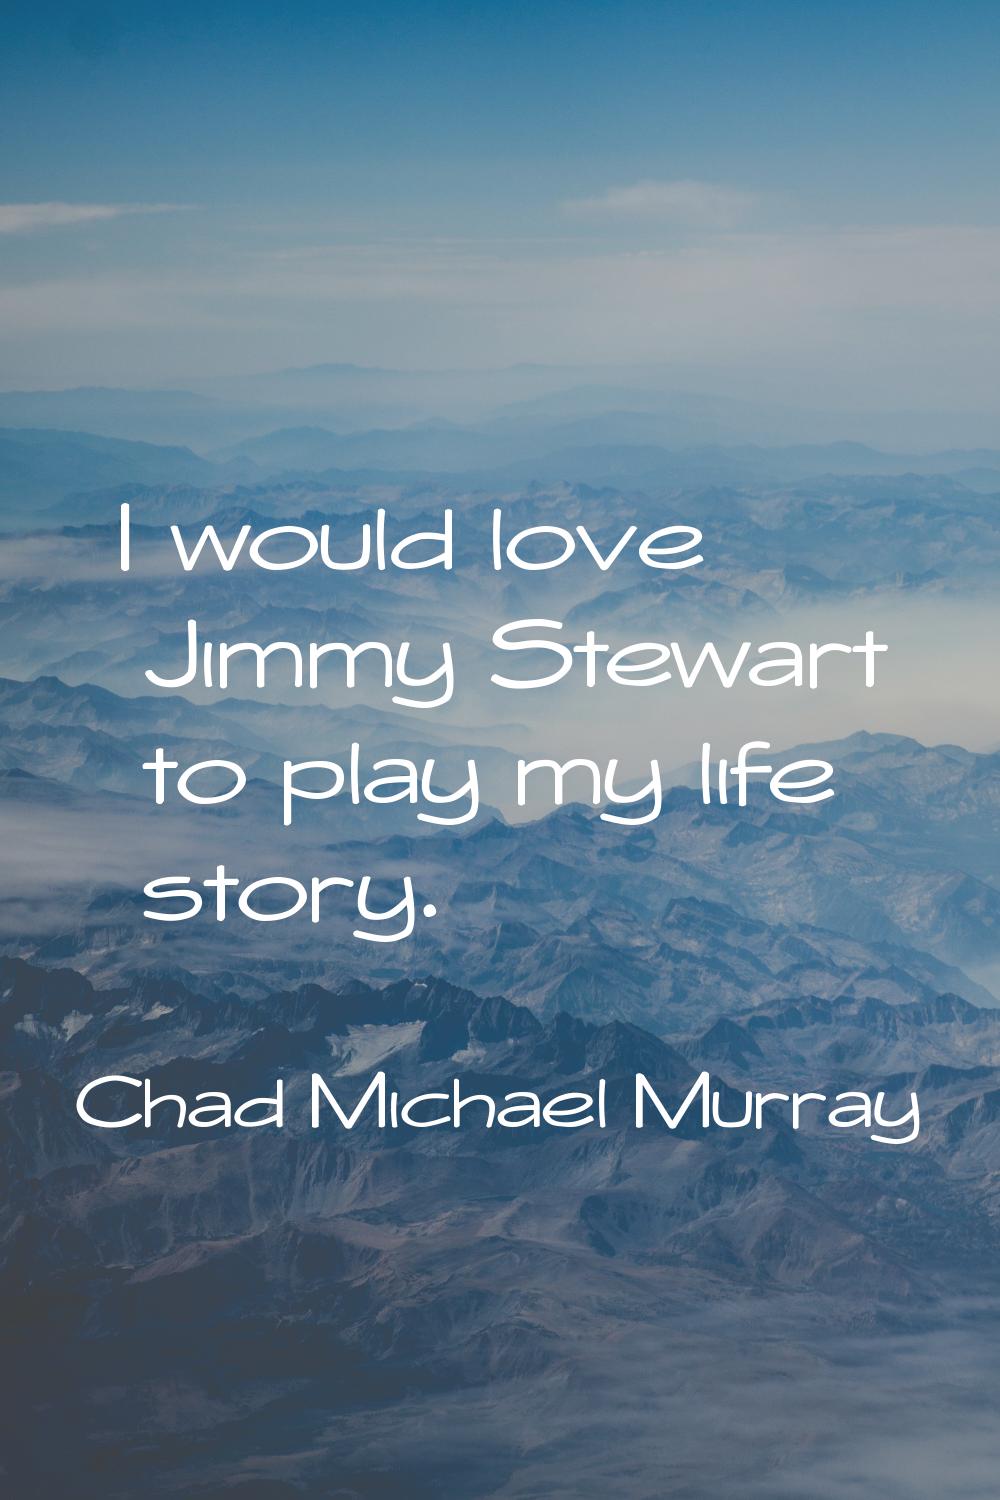 I would love Jimmy Stewart to play my life story.